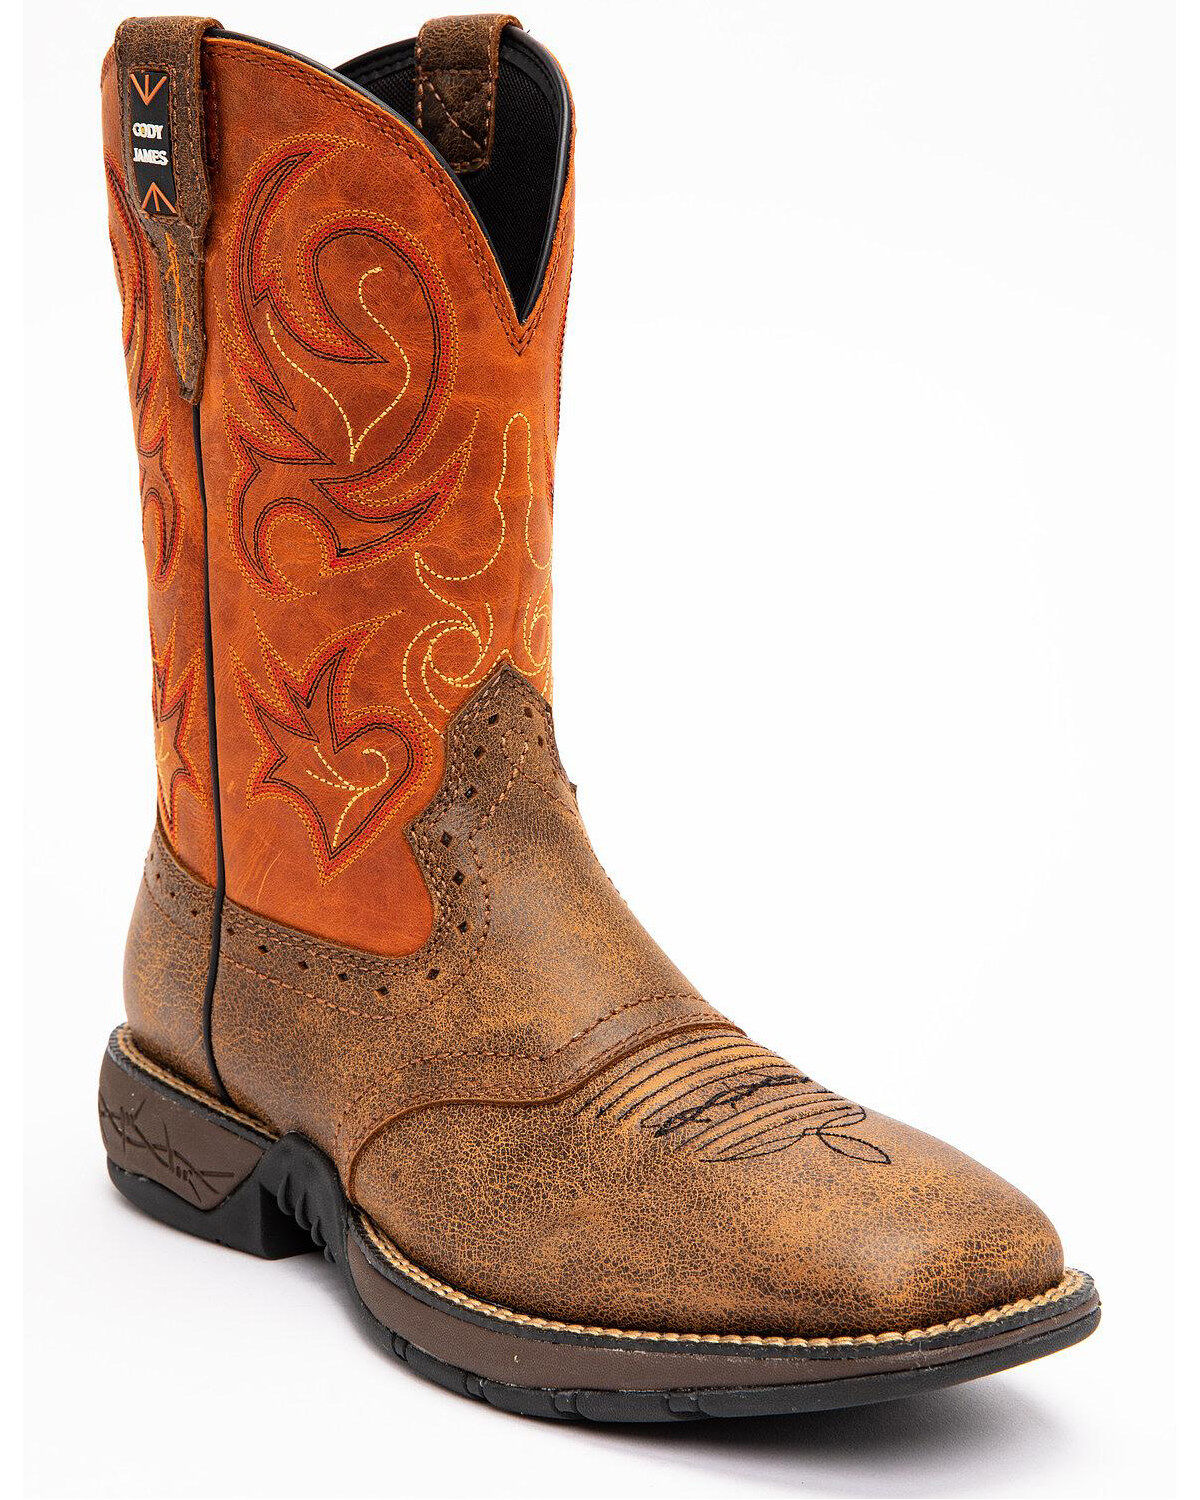 western work boots composite toe